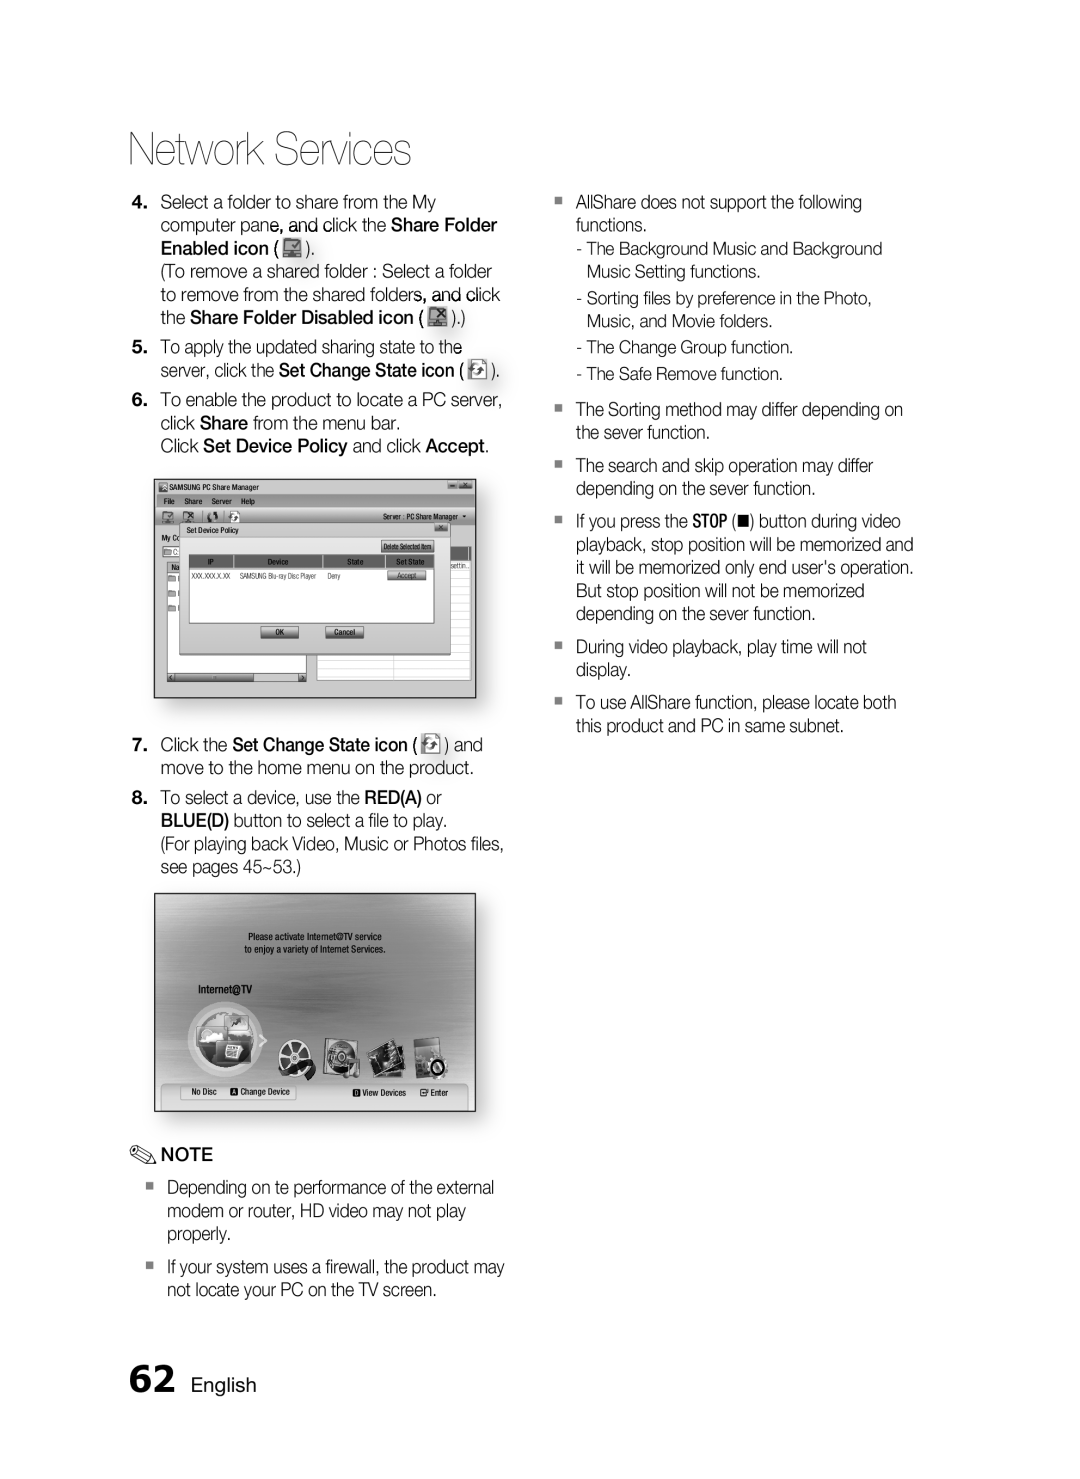 Samsung AH68-02290S, HT-C6730W user manual English, Network Services 